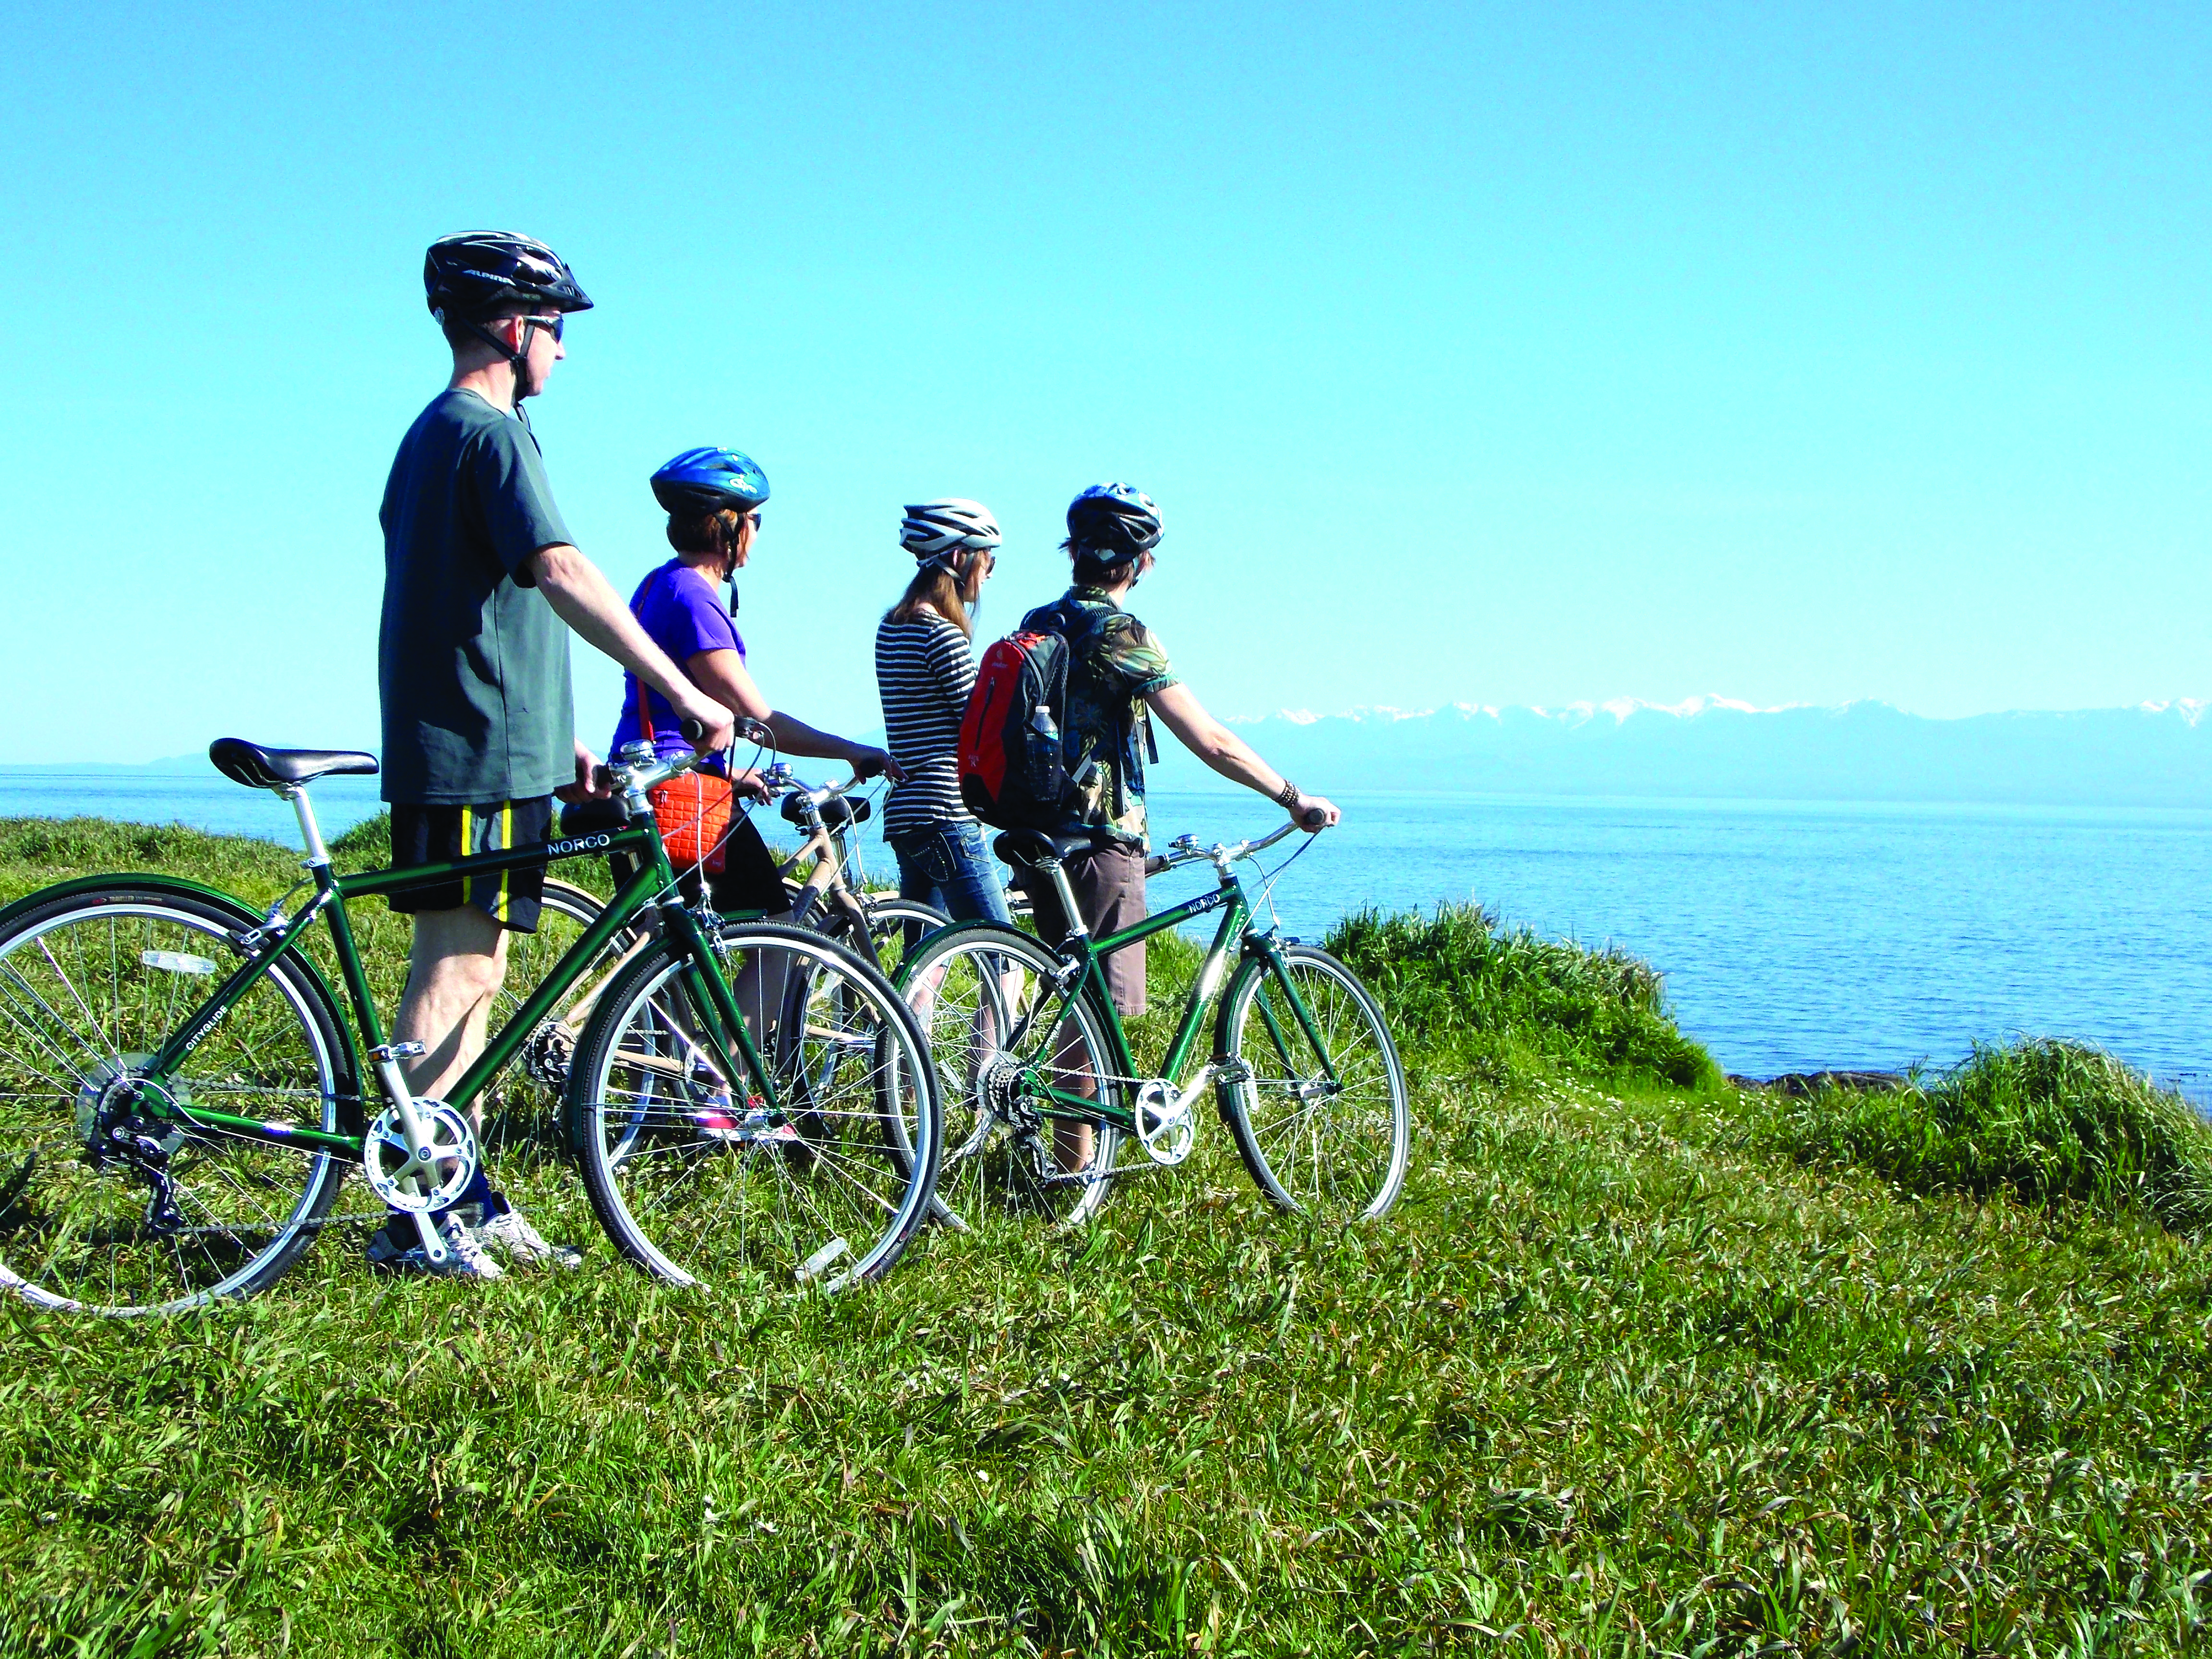 Bikers looking out to sea. Photo courtesy of Pedaler Tours